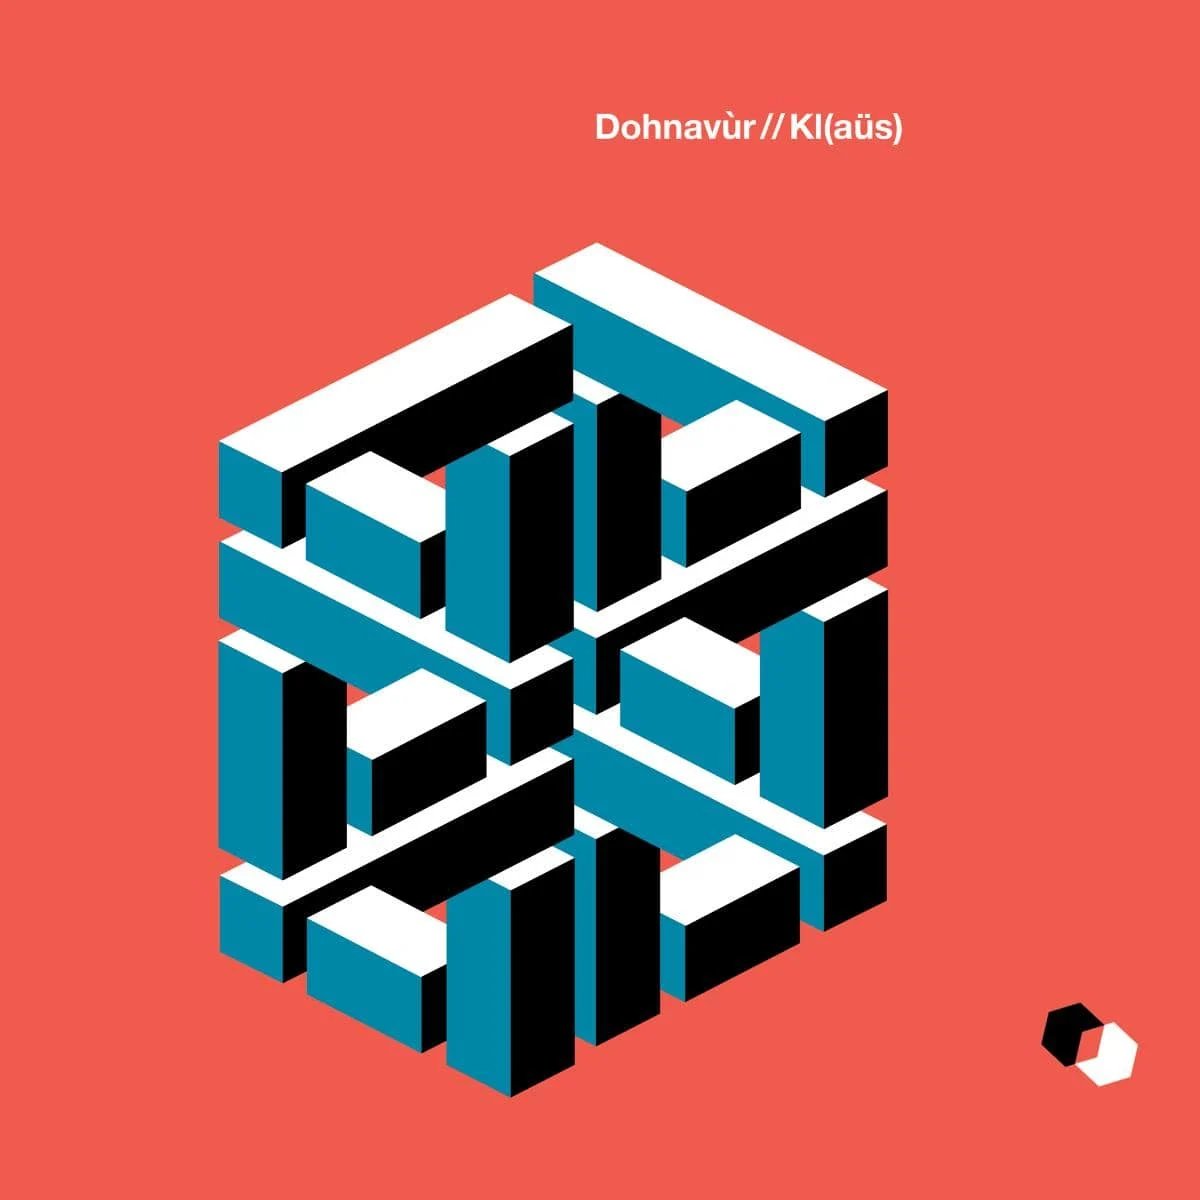 PRE-ORDER: 'Dohnavùr / Kl(aüs)' by Dohnavùr / Kl(aüs) This remote collaborative work lands as a deluxe 16-page hardback book and CD package. @only1klaus @dohnavur_ @CastlesInSpace normanrecords.com/records/202582…